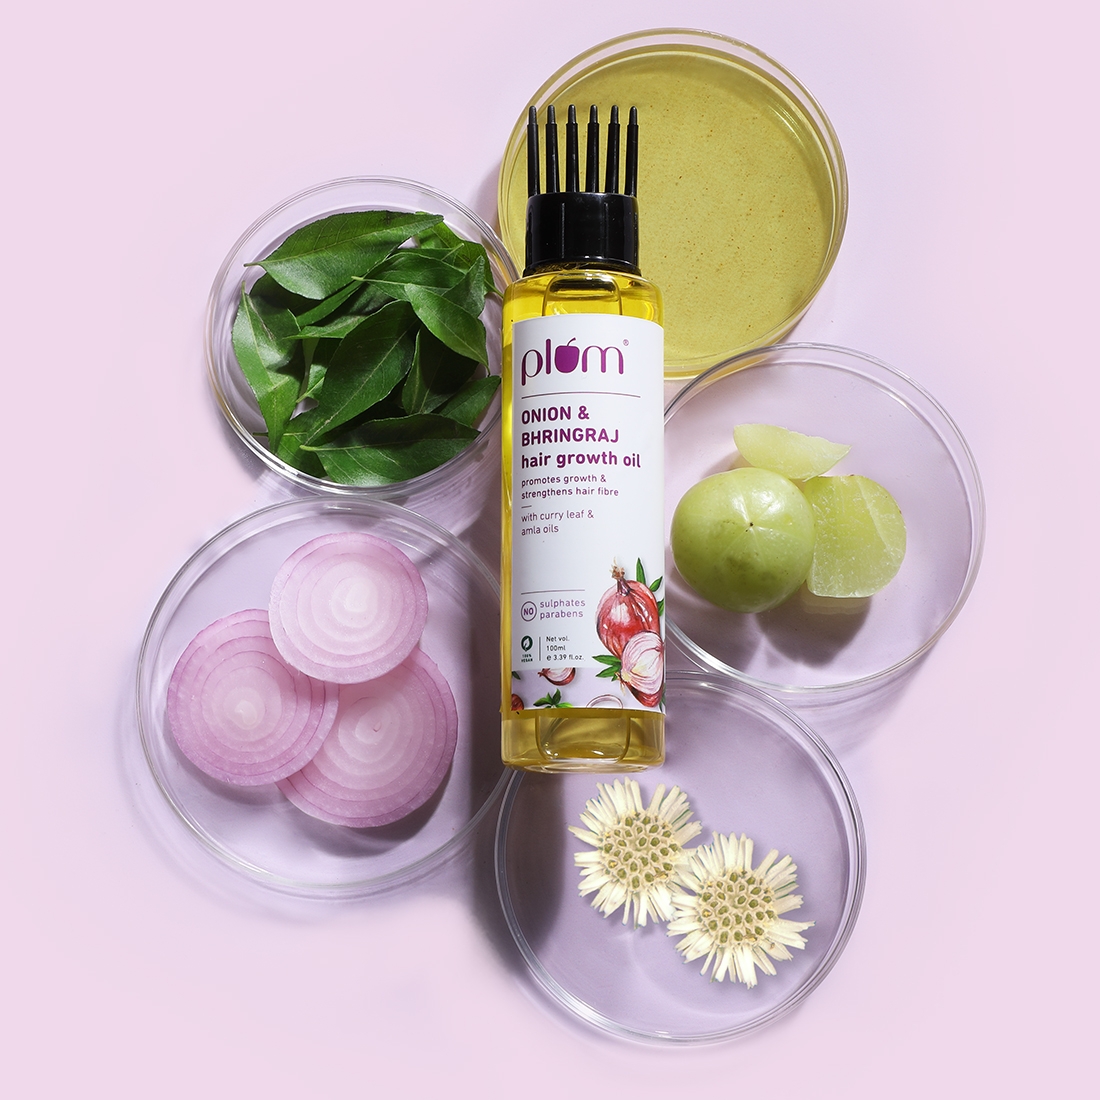 Plum Be Good | Plum Onion and Bhringraj Hair Growth Oil with Curry Leaf and Amla Oils | For All Hair Types| Sulphate-Free | Paraben-Free | 100% Vegan | Promotes Growth, Strengthens Hair Fibre